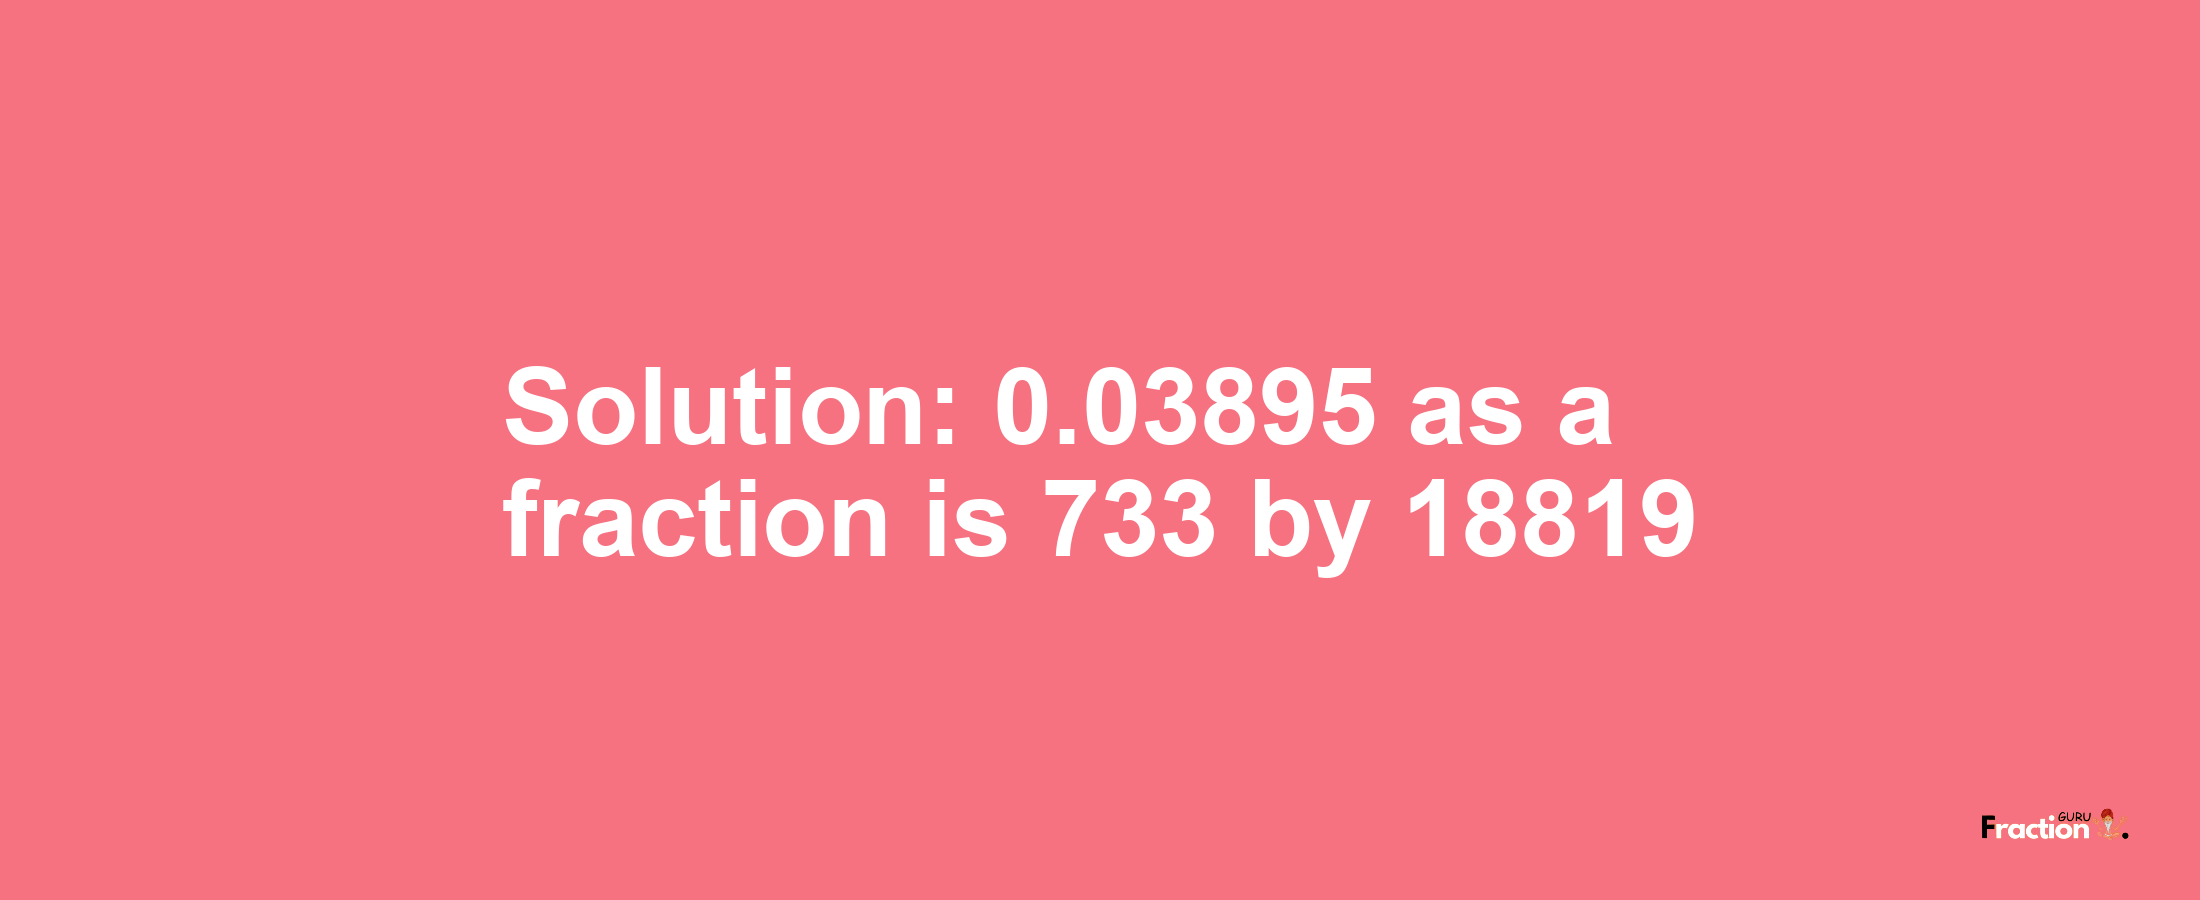 Solution:0.03895 as a fraction is 733/18819